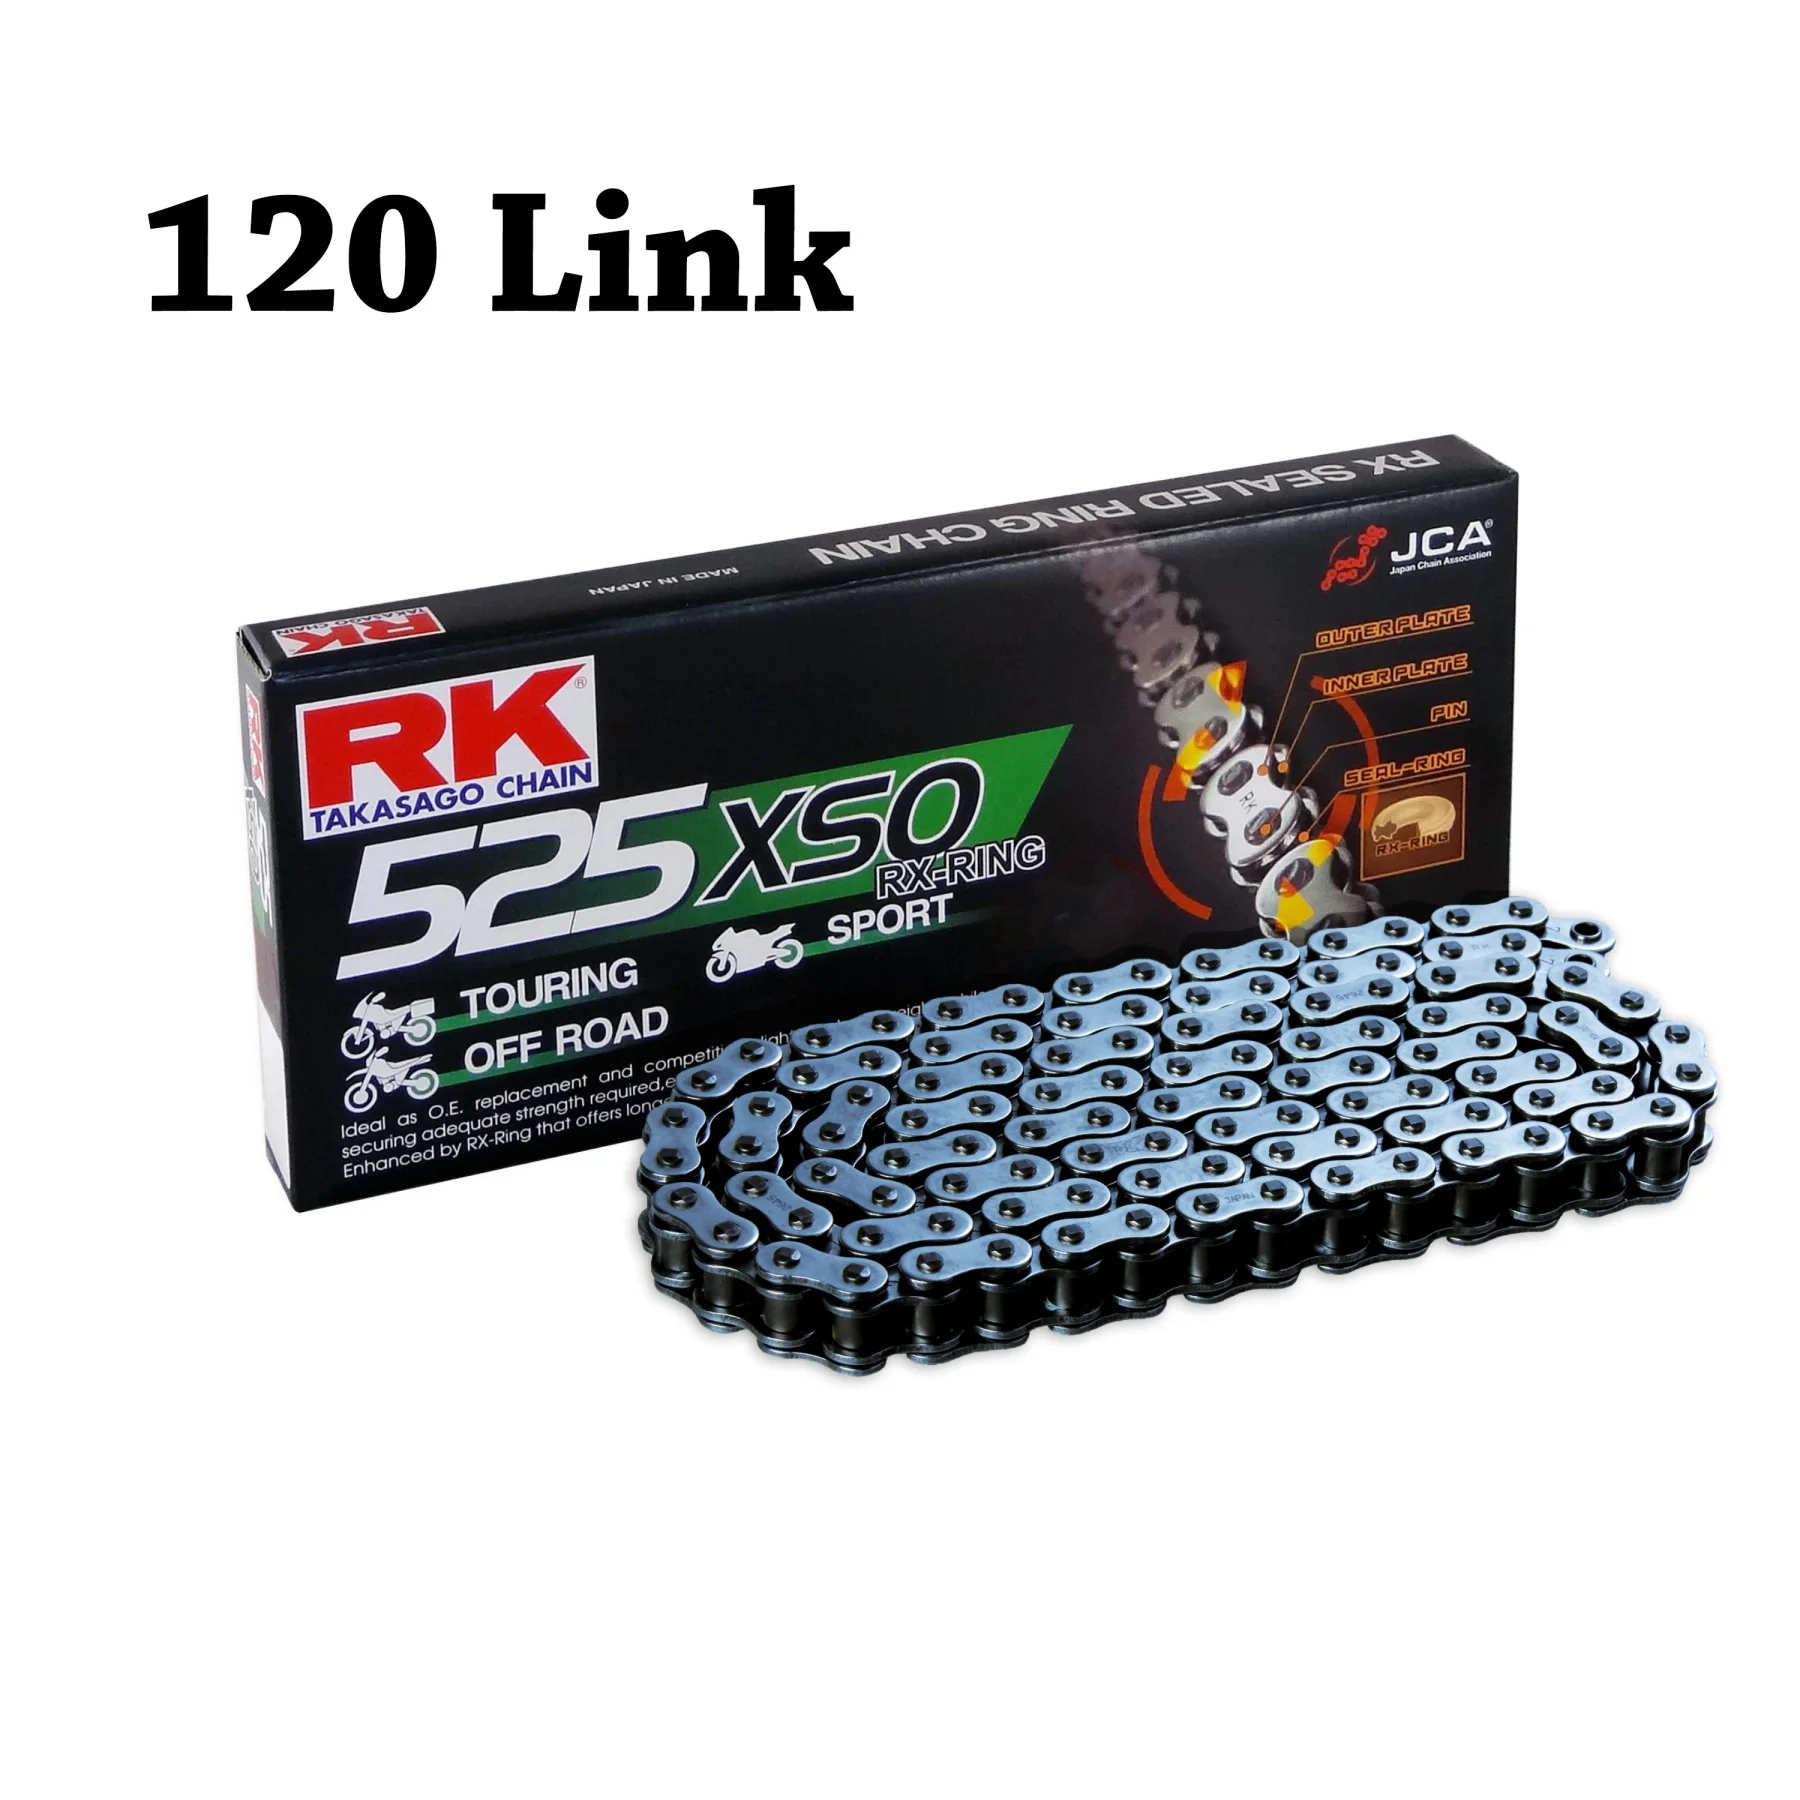 

RK Motorcycle Chain X-Ring 525 XSO 120 L for Benelli 125-250-302-500-600-750-899-900-1130 2C/BN/TNT/TRK/RS/BX/Tre-K/Sei/Tornado